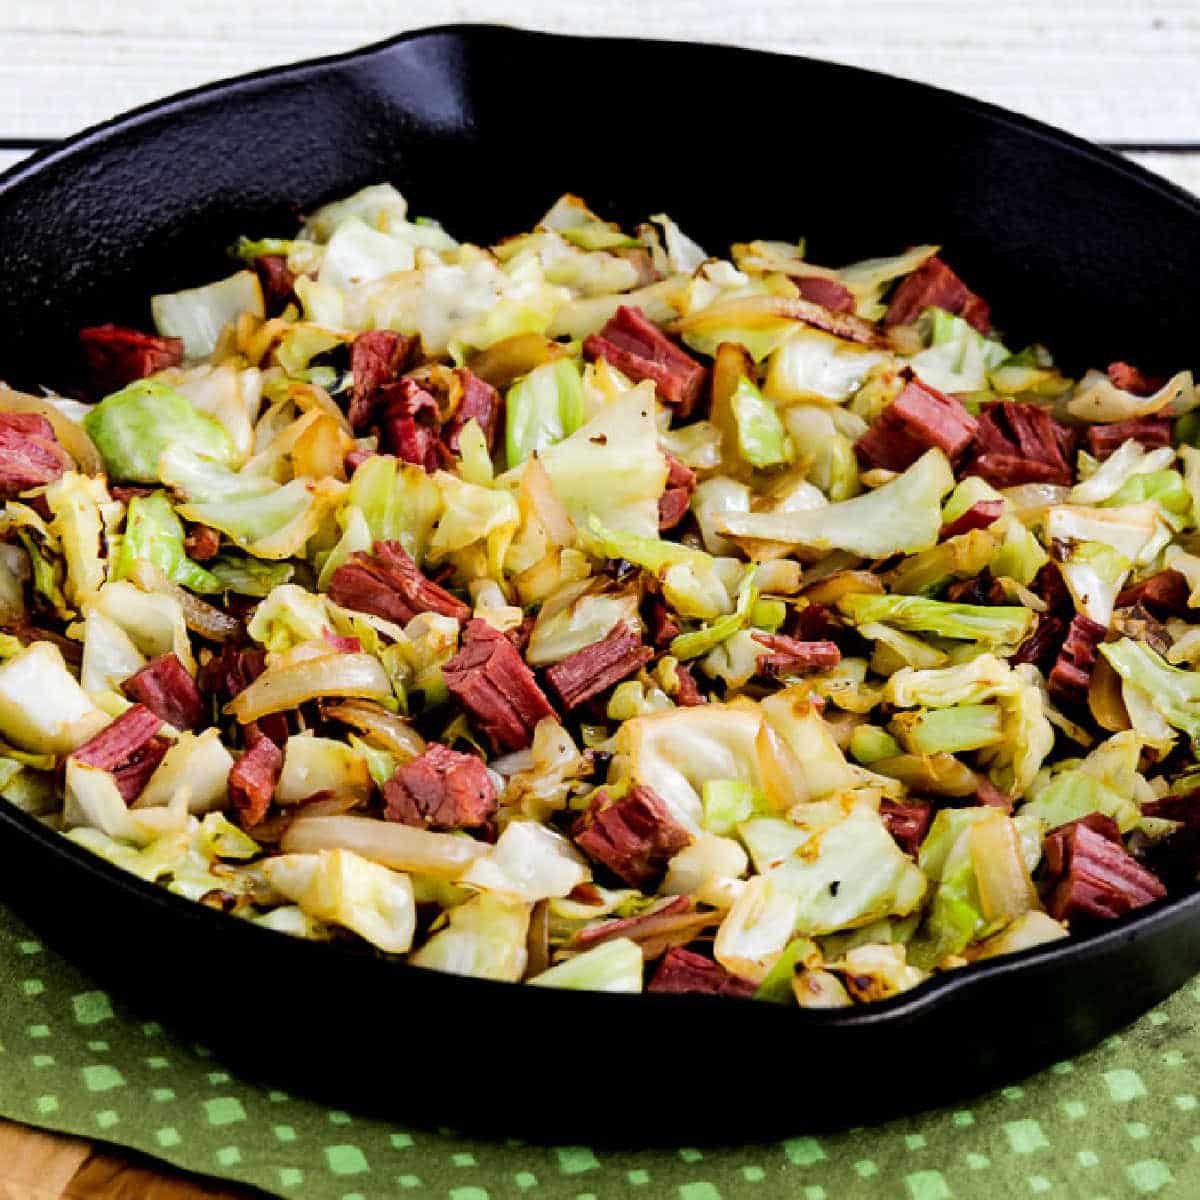 Square image for Fried Cabbage with Corned Beef shown in cast-iron skillet on green napkin.